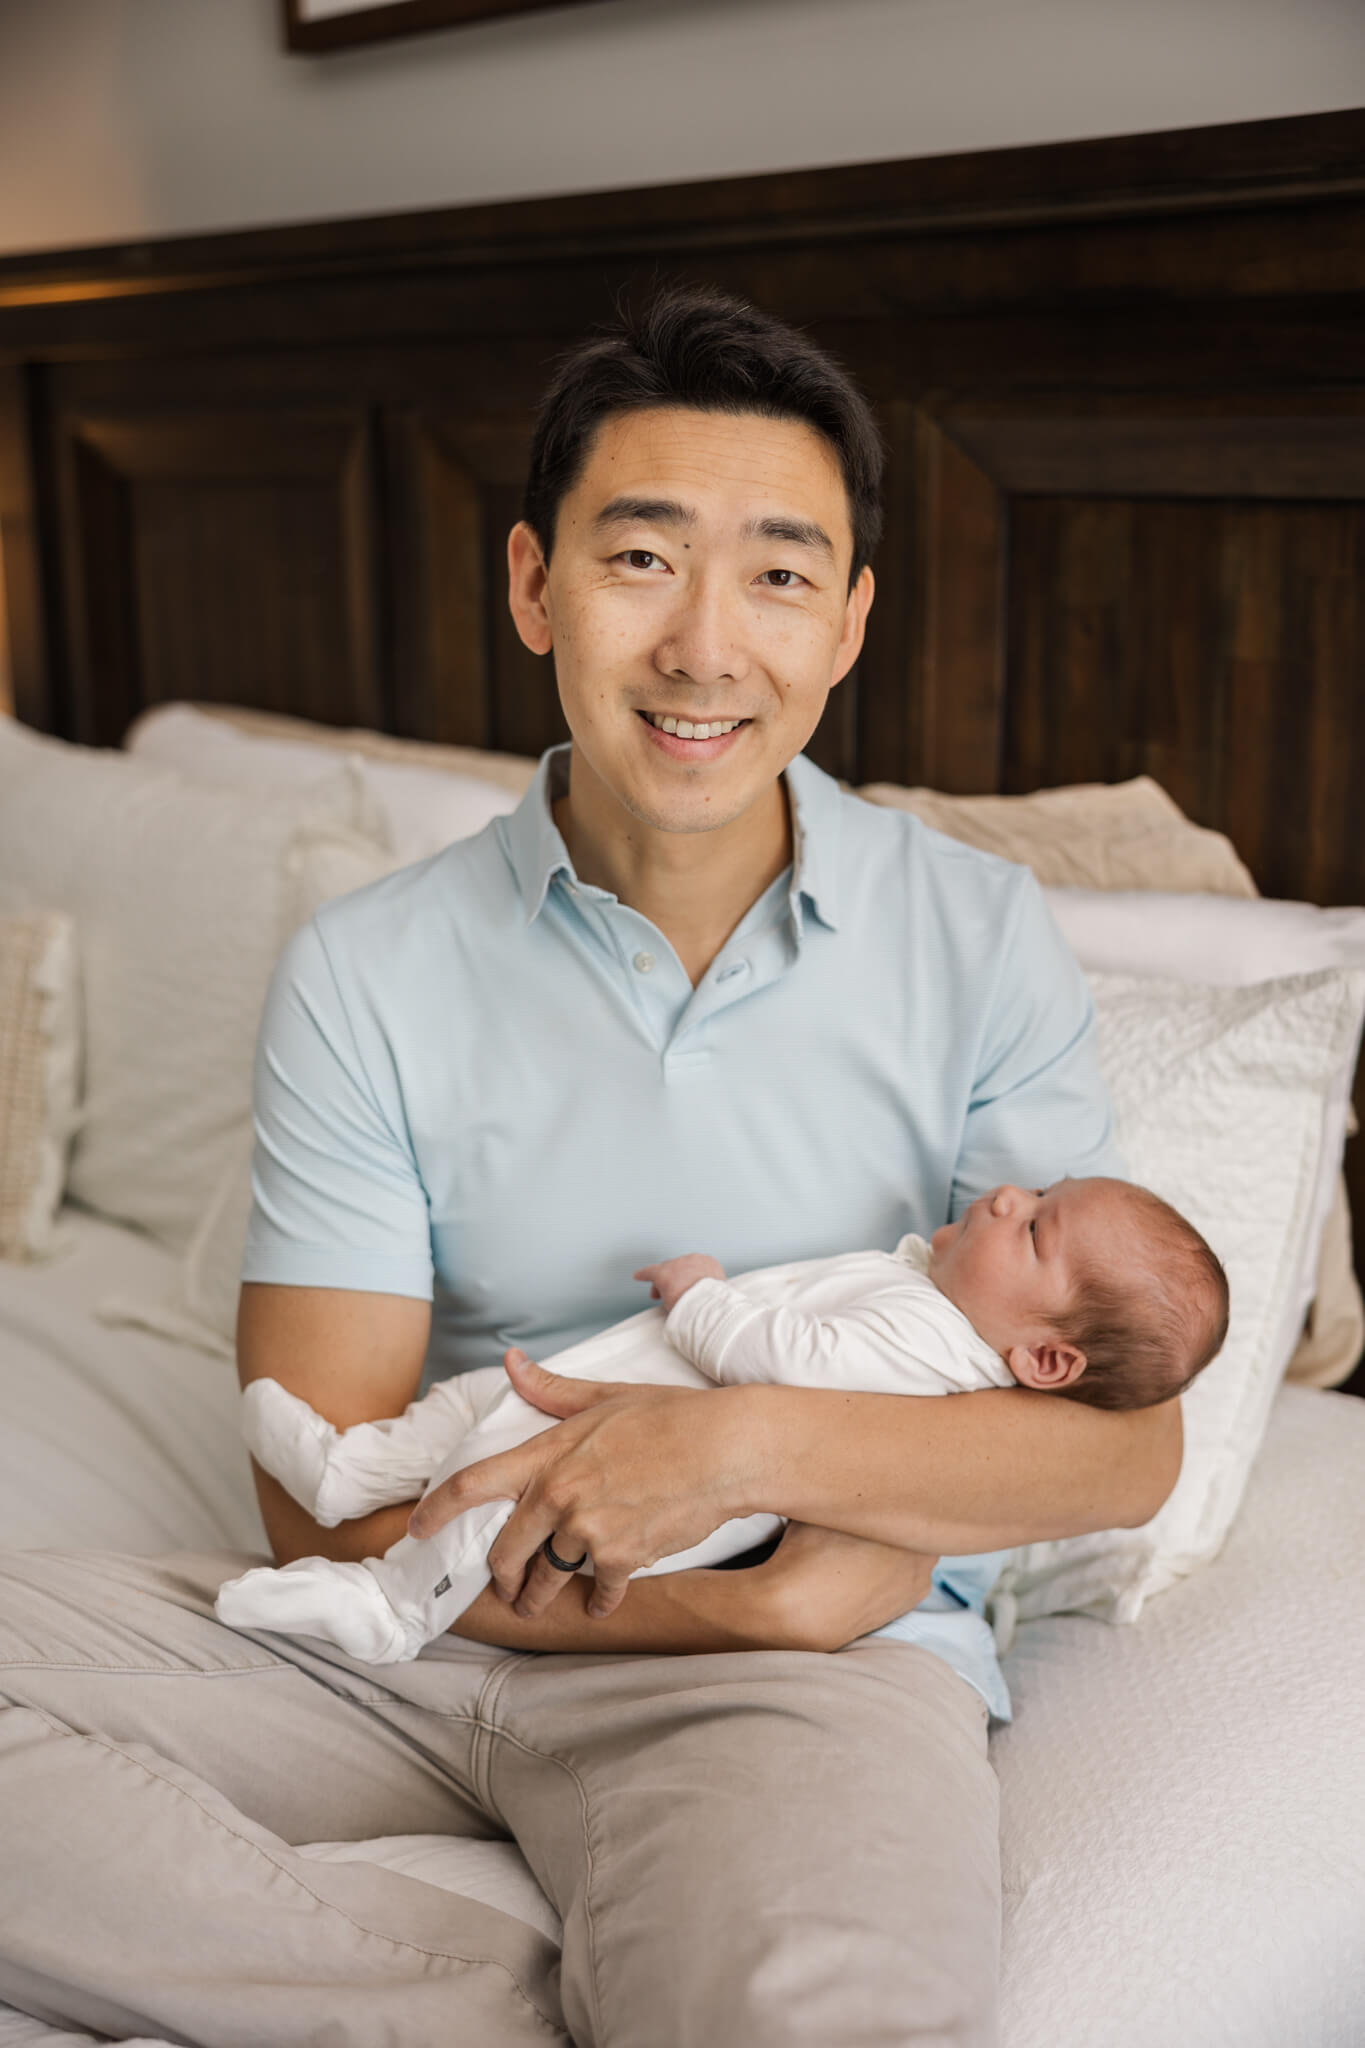 Quiet moment of dad with his newest son during their in home newborn session. The Swank Company